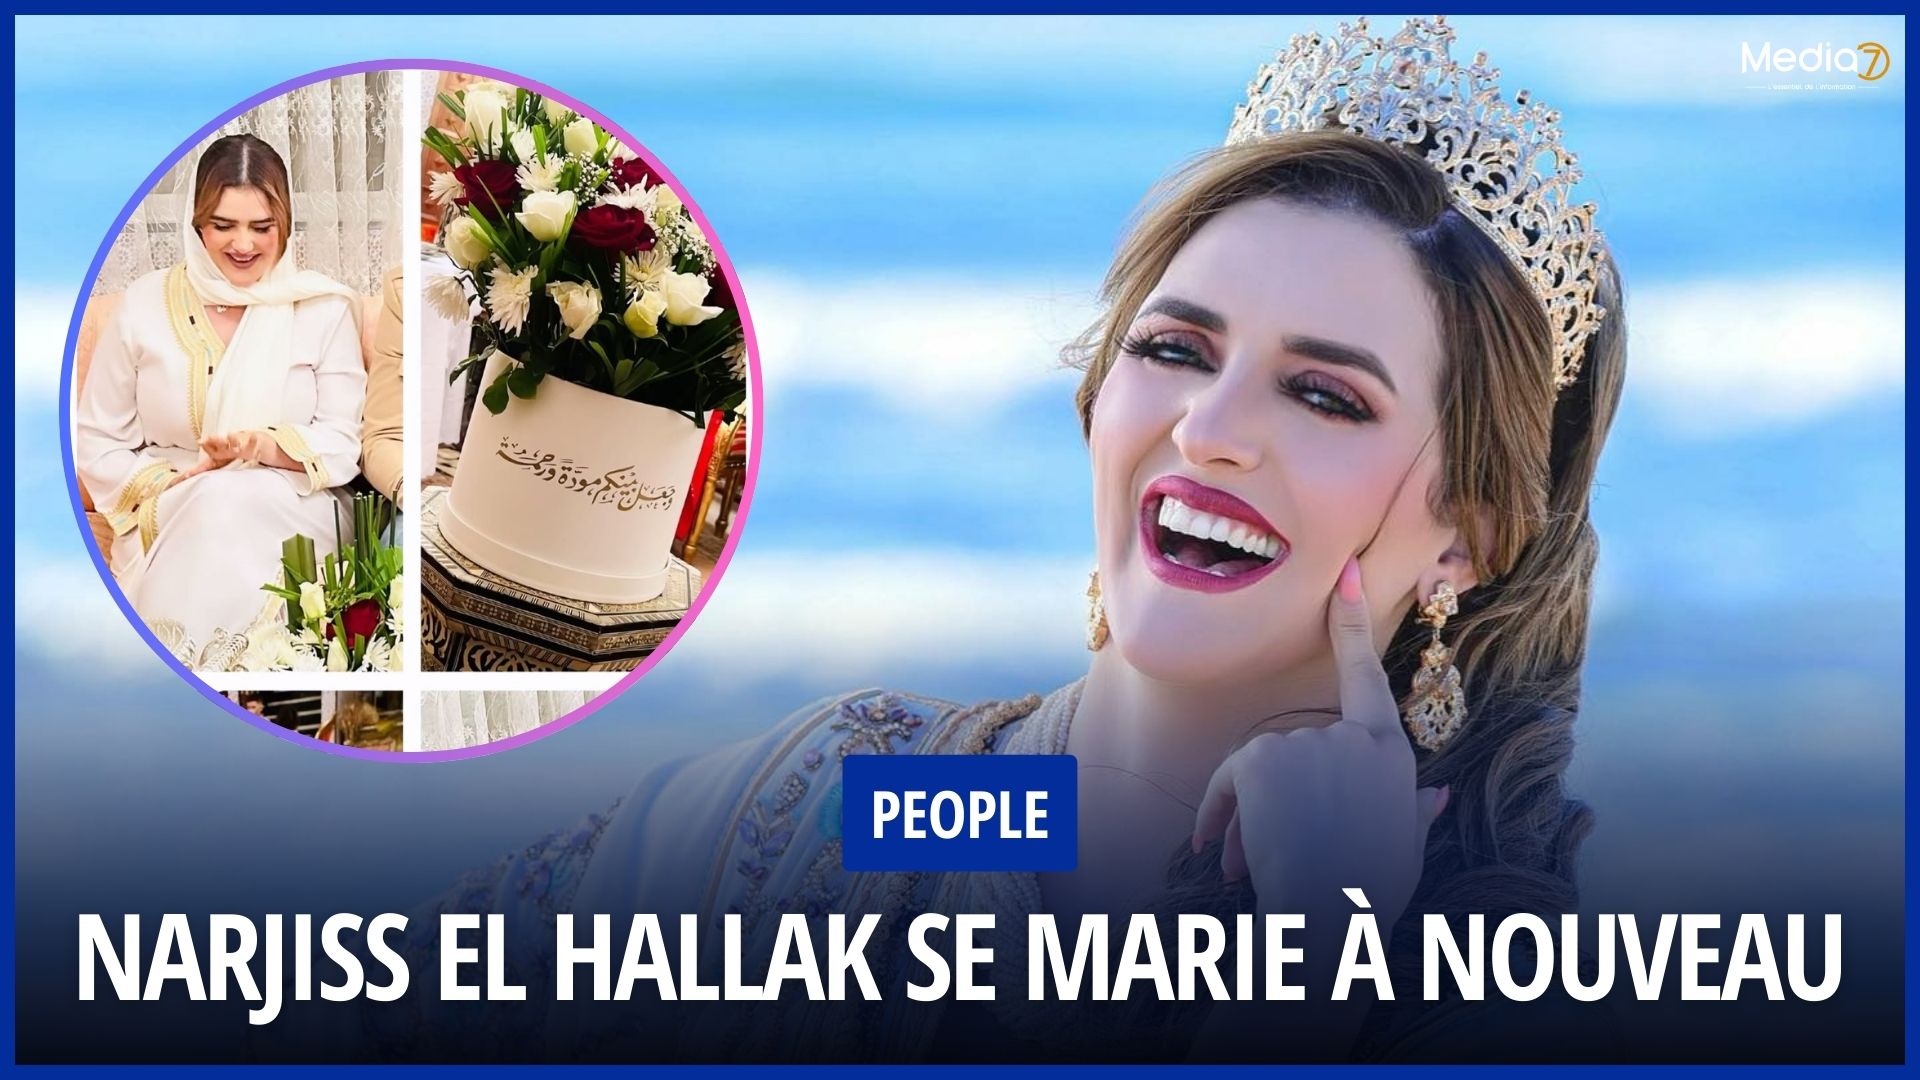 Narjiss El Hallak Gets Married and Shares Her Joy with Her Fans